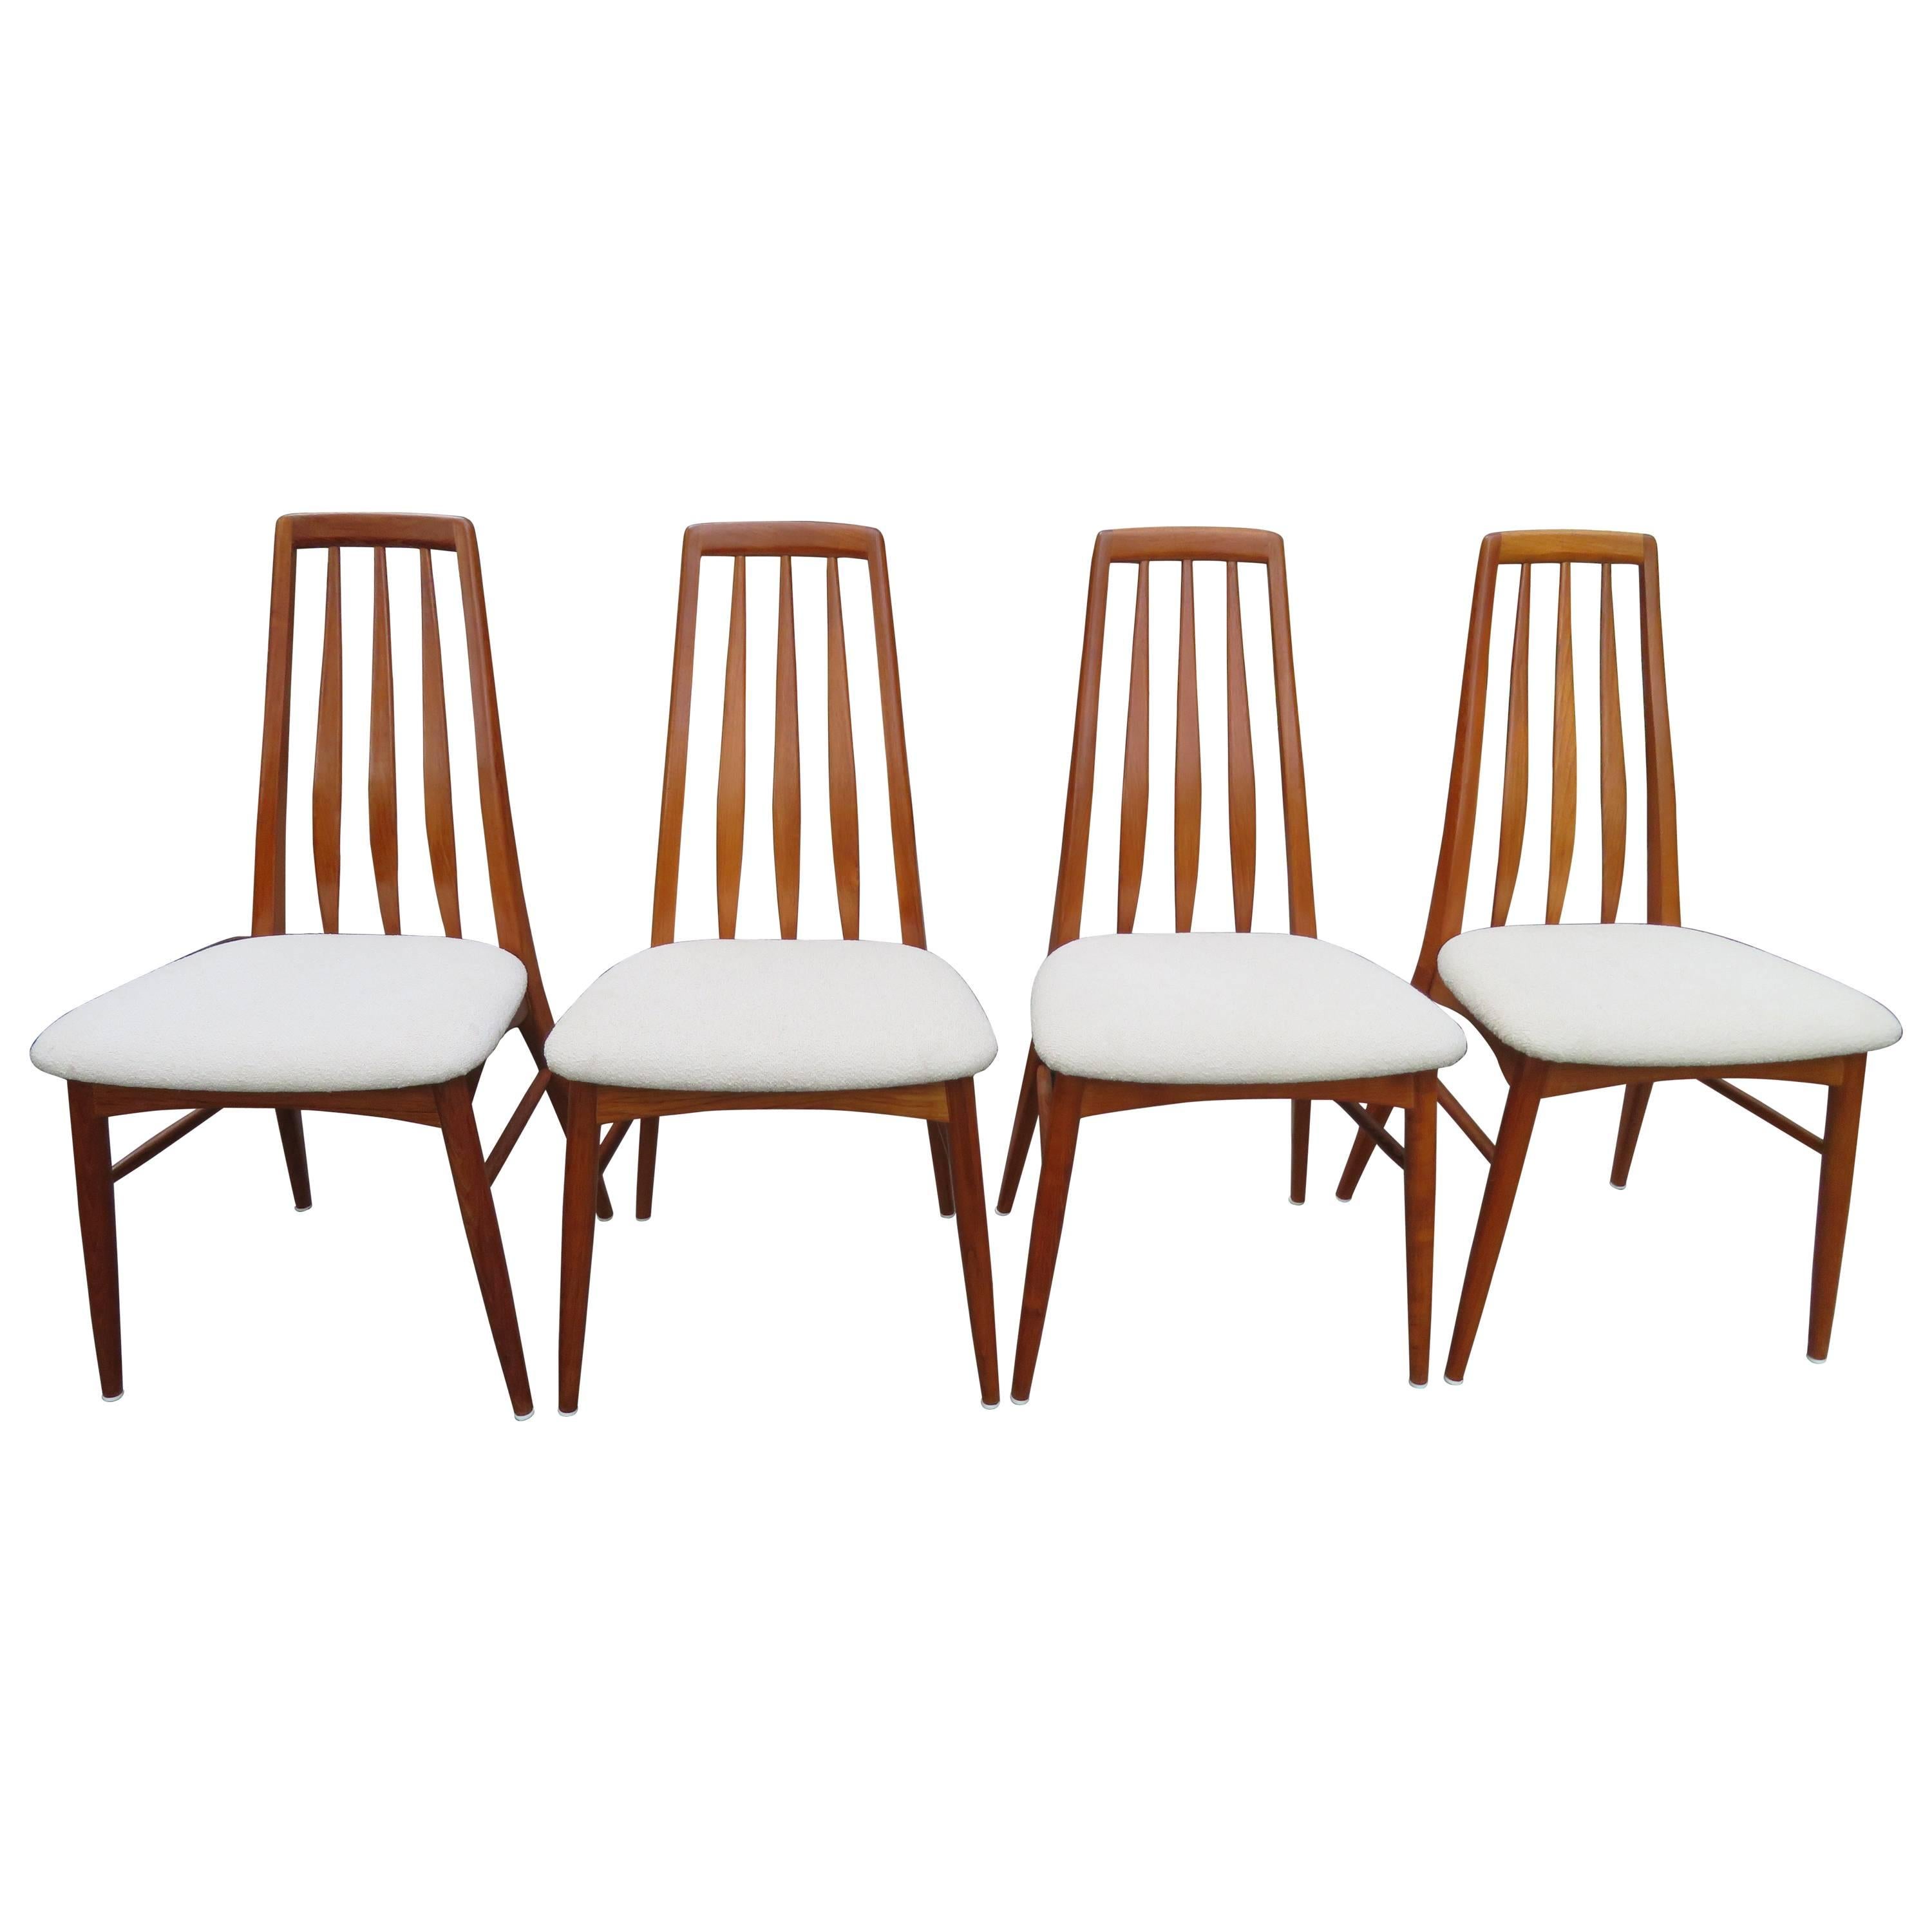 Lovely Set of Four Teak Eva Dining Room Chairs by Niels Koefoed, 1960s For Sale